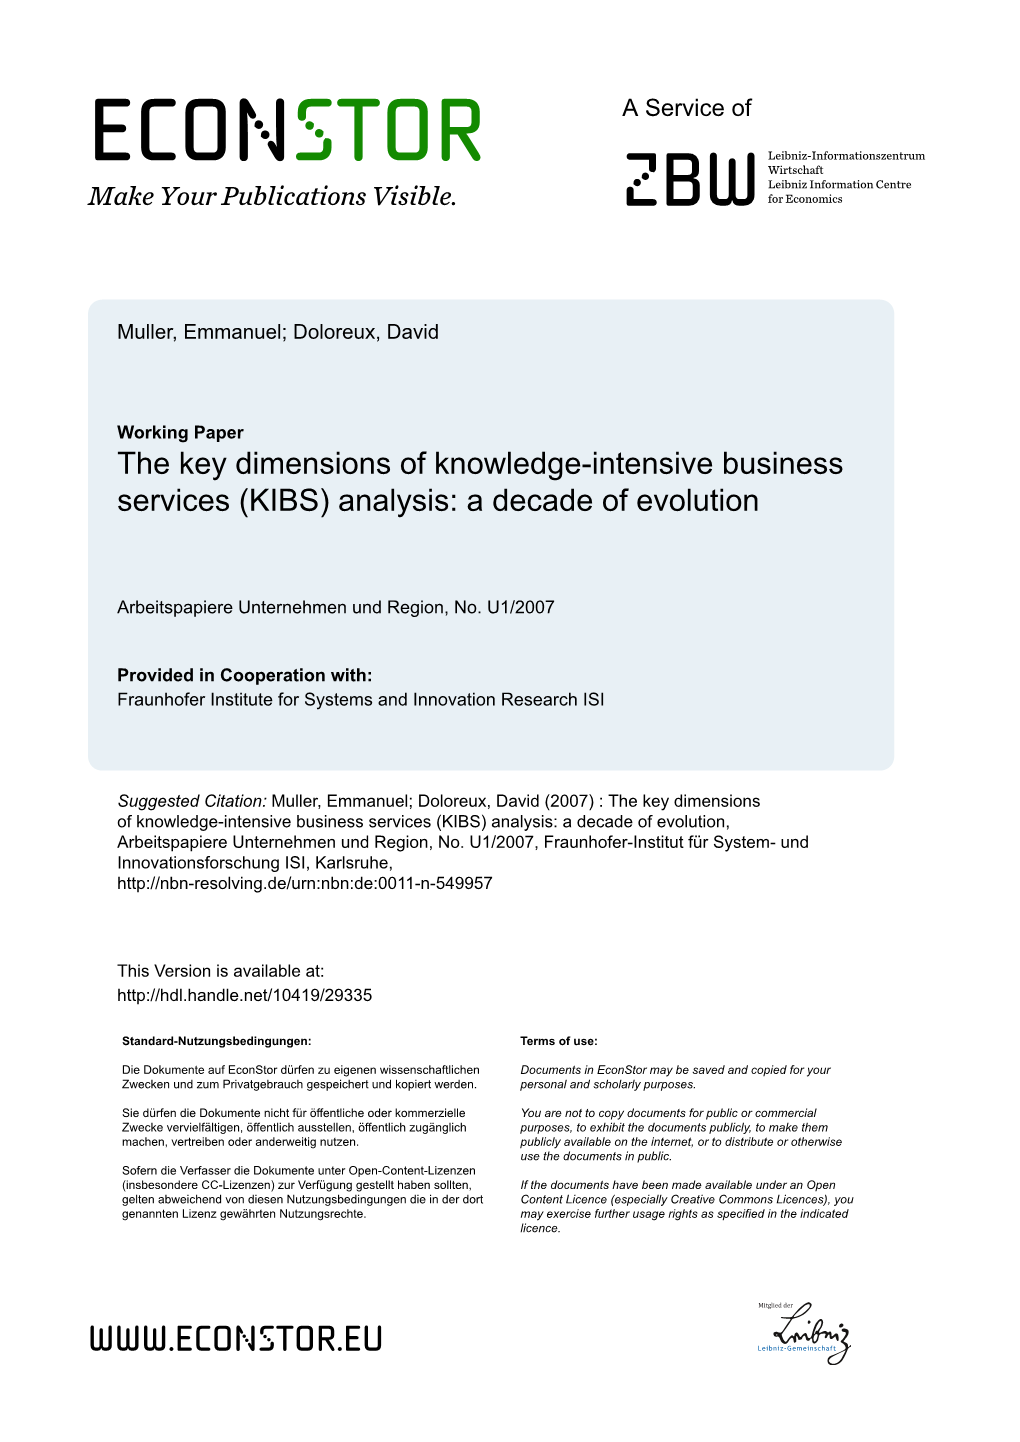 The Key Dimensions of Knowledge-Intensive Business Services (KIBS) Analysis: a Decade of Evolution